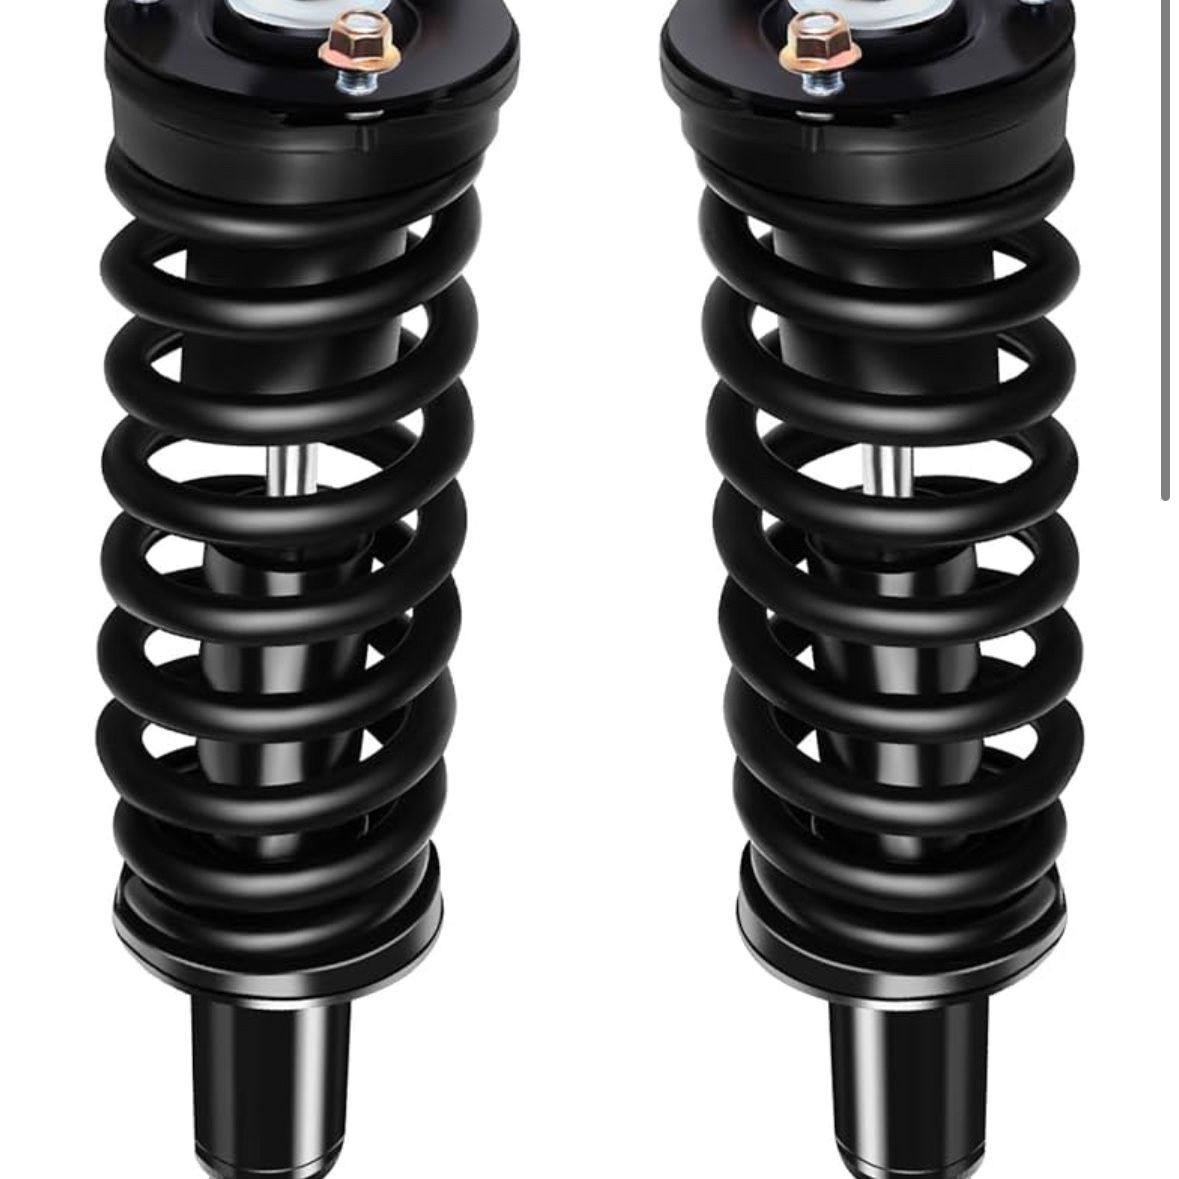 ECCPP Complete Struts Front Pair Strut Coil Spring Assembly Shock Absorber for 2004-2011 for Chevrolet Colorado,2004-2011 for GMC Canyon Set of 2